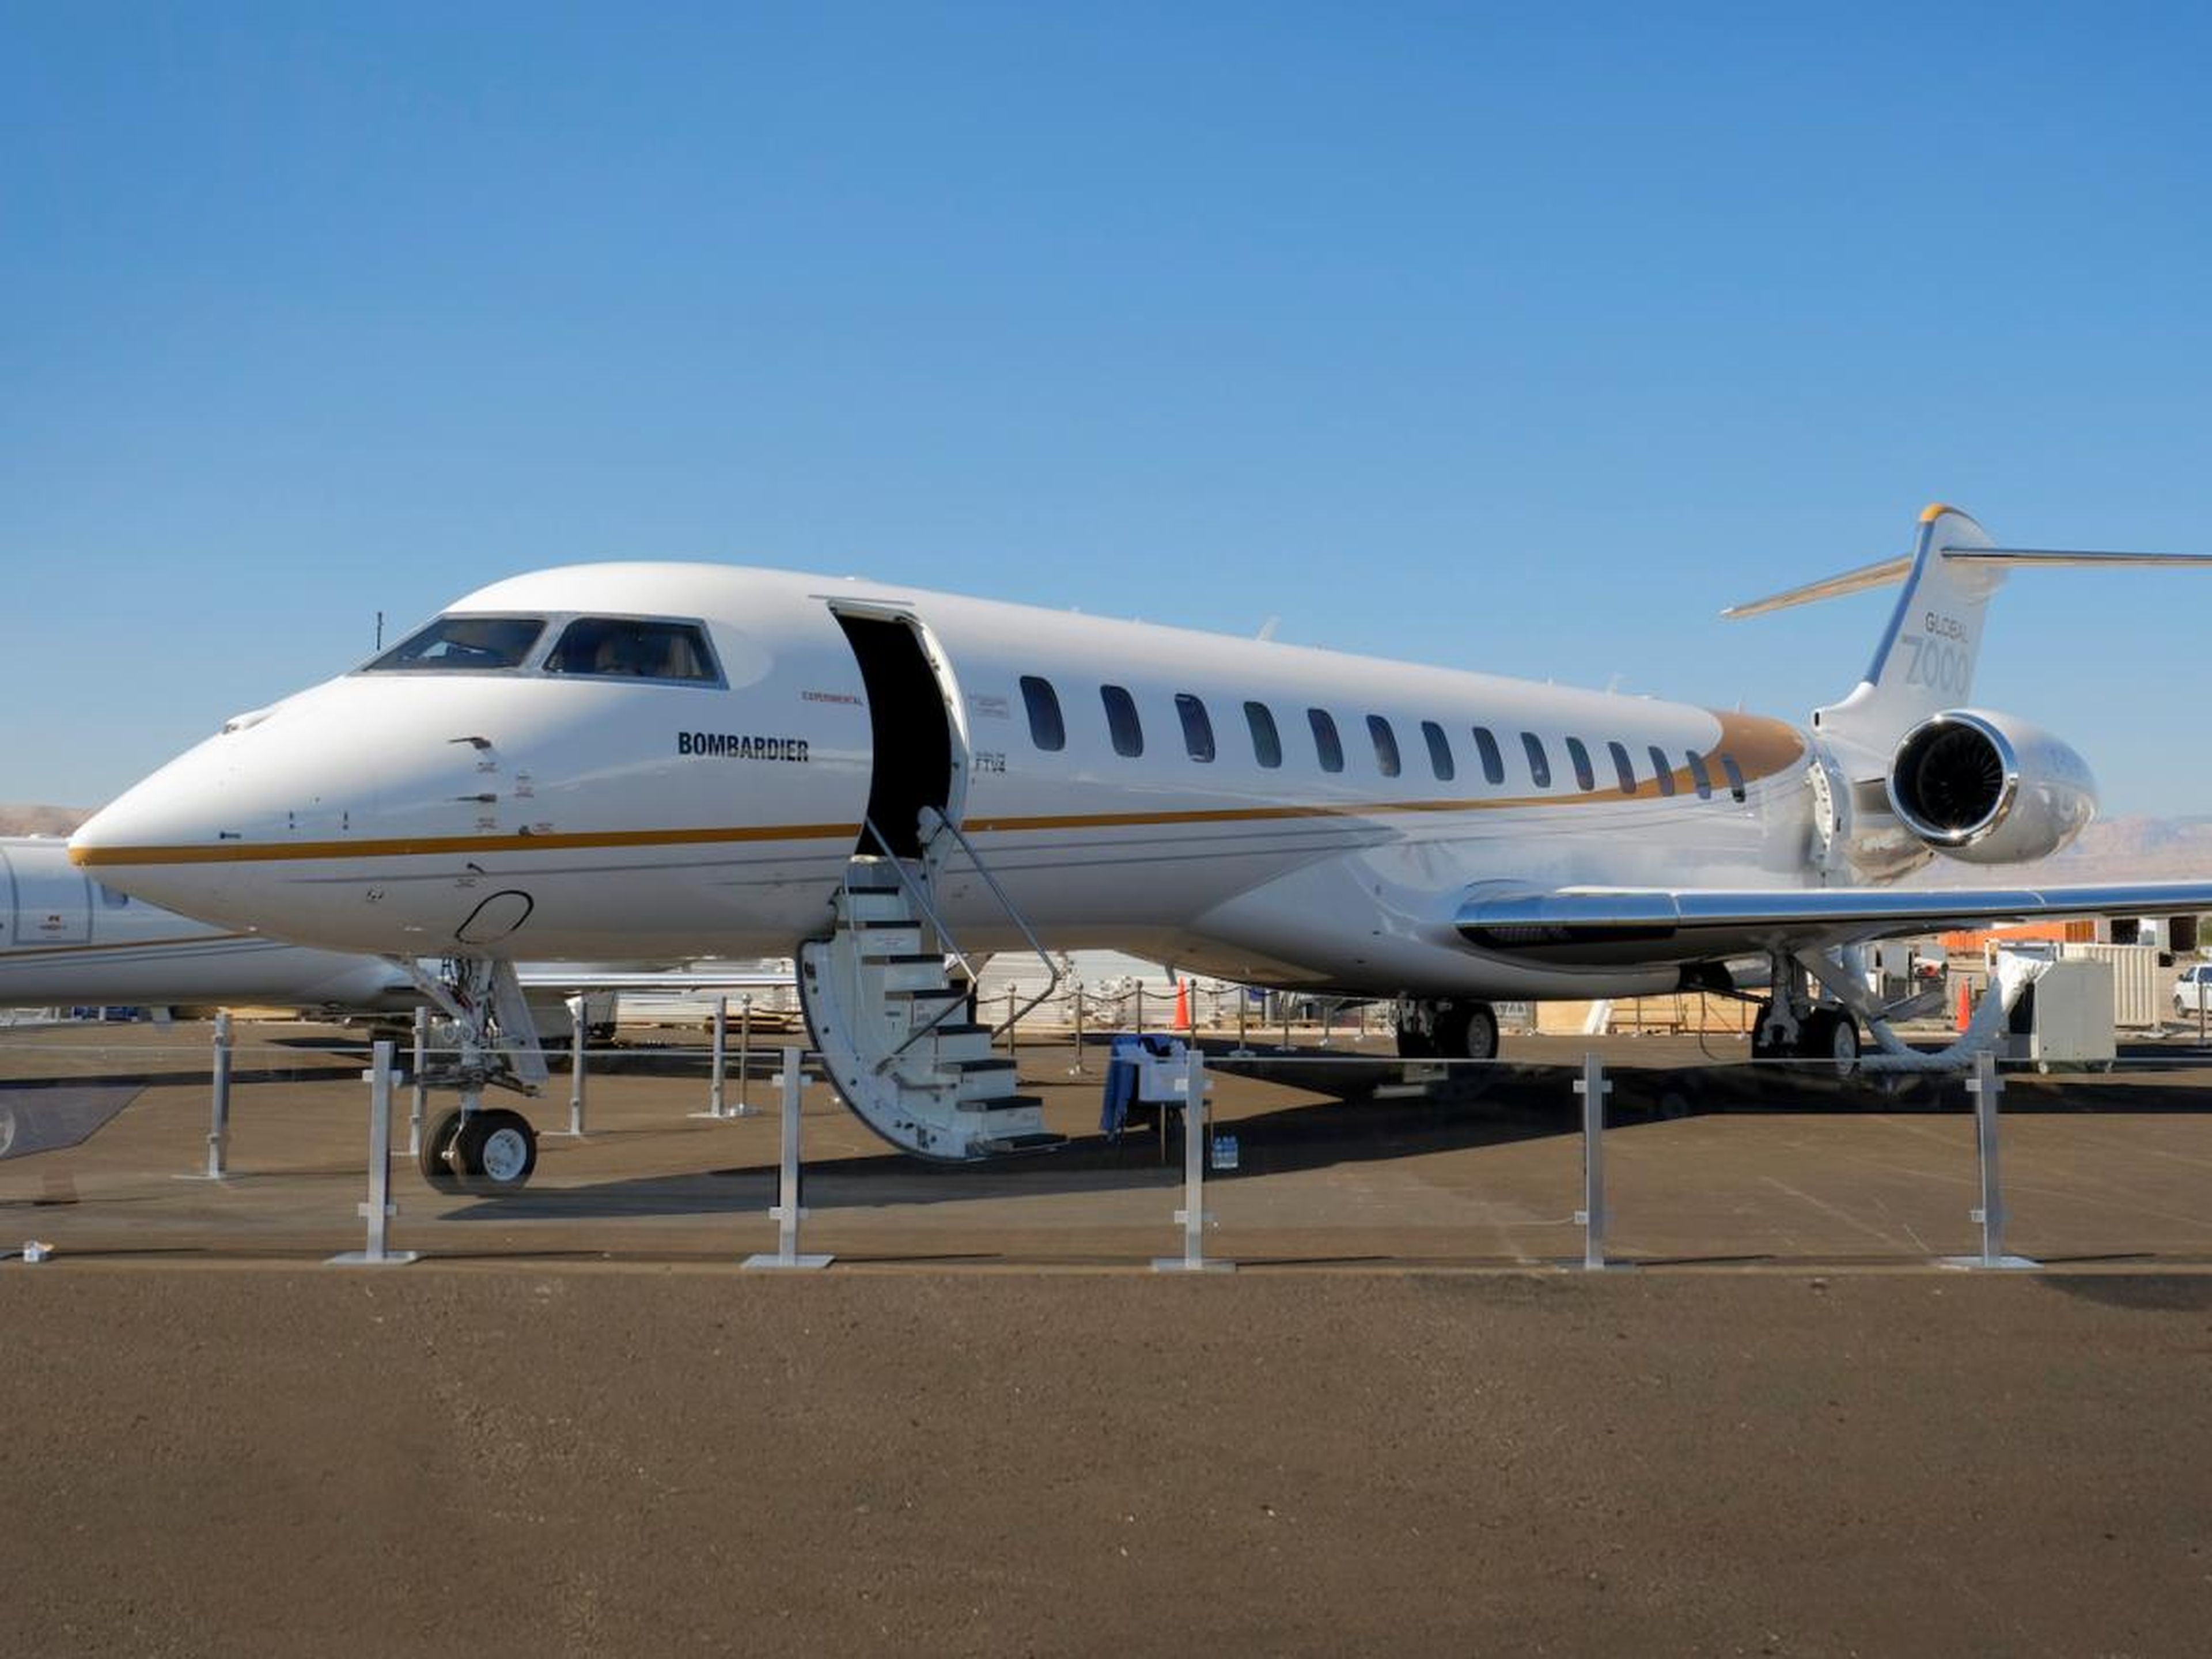 ... the newly introduced Global 7500, which entered service in December.